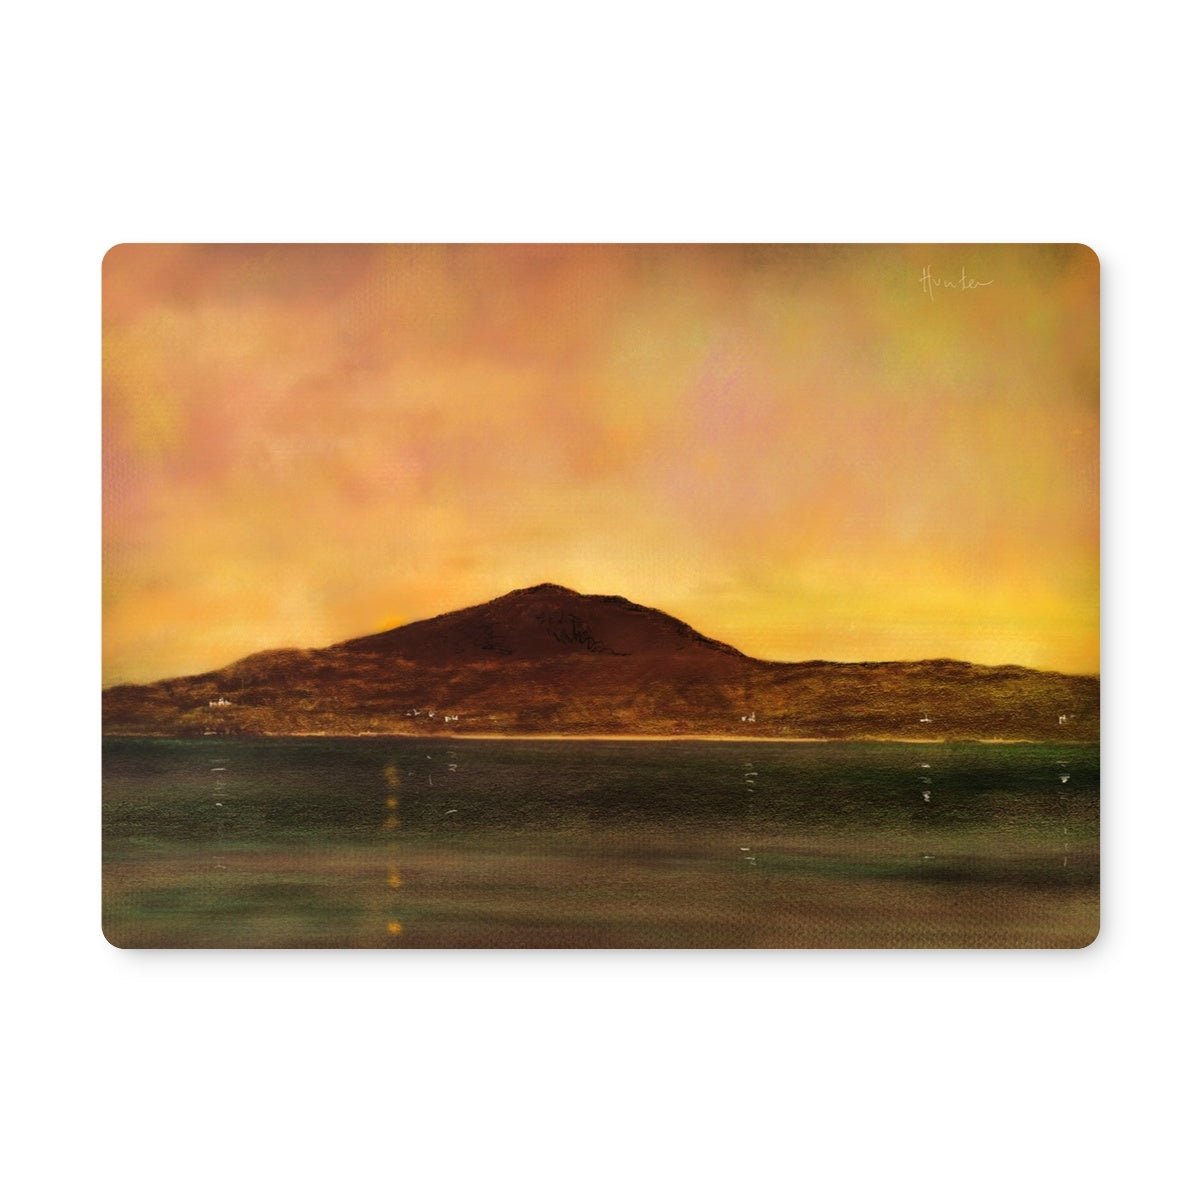 Eriskay Dusk Art Gifts Placemat-Placemats-Hebridean Islands Art Gallery-2 Placemats-Paintings, Prints, Homeware, Art Gifts From Scotland By Scottish Artist Kevin Hunter